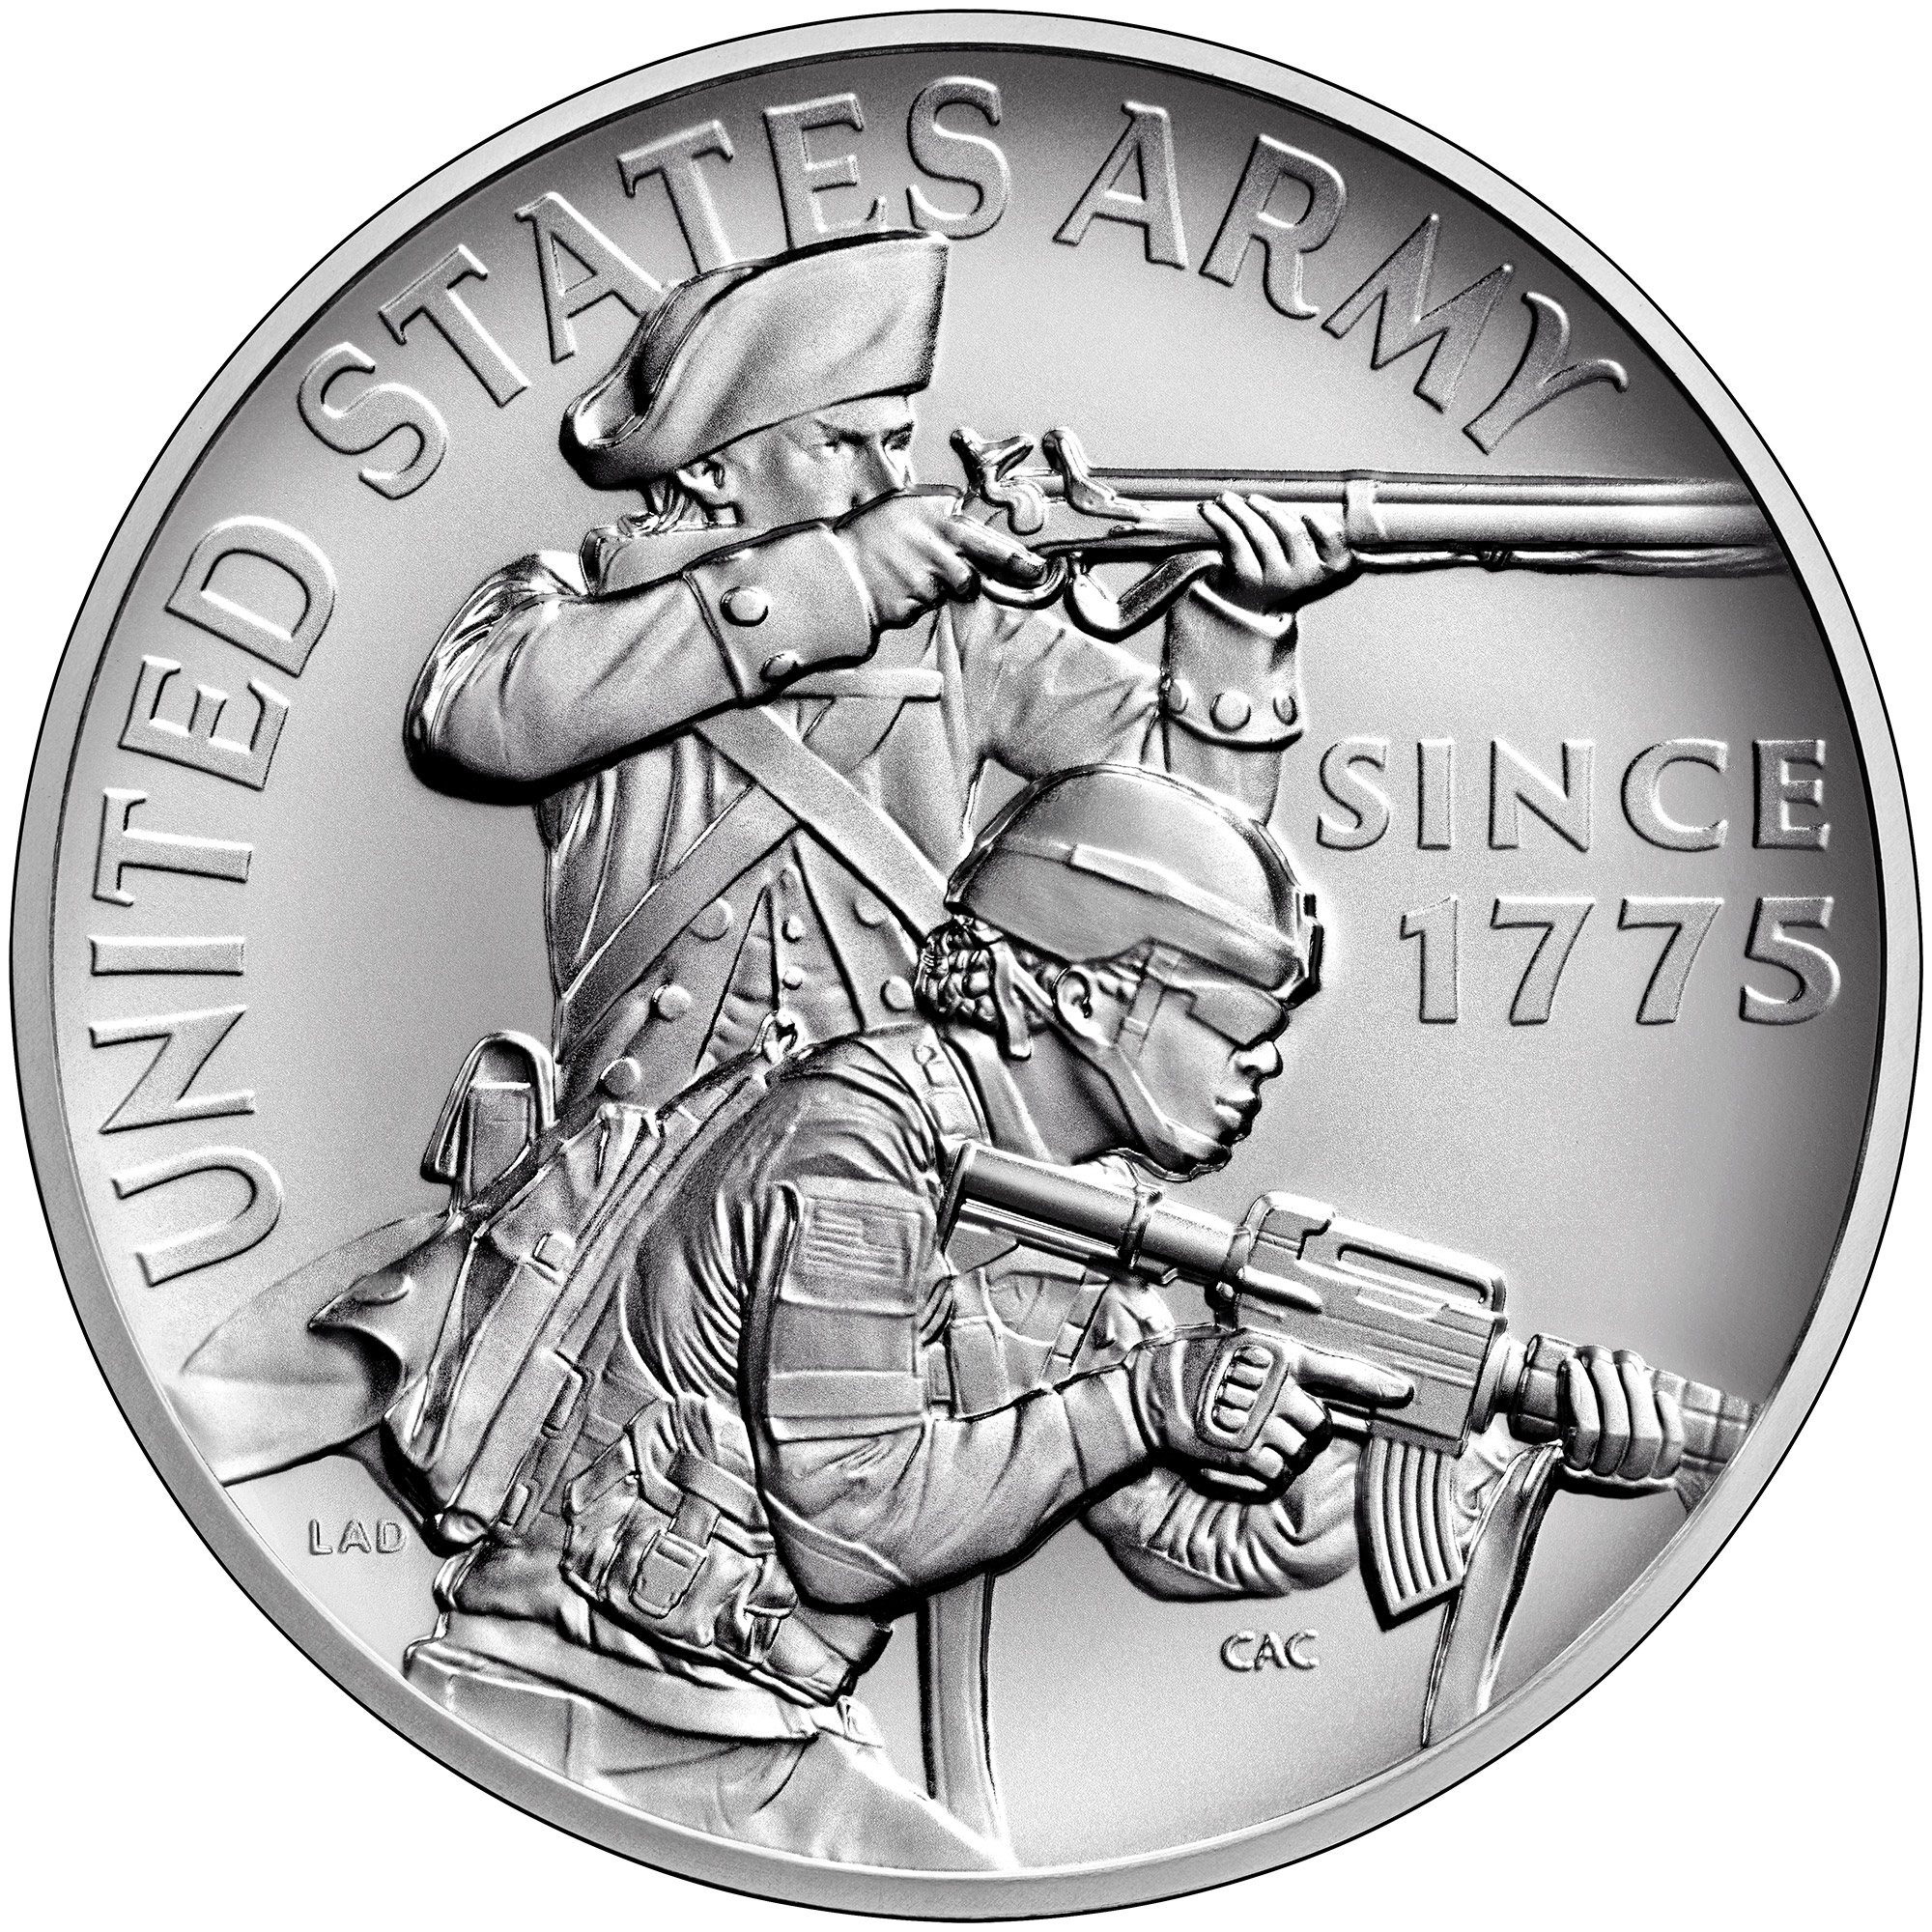 armed-forces-silver-medal-us-army-obverse.jpg